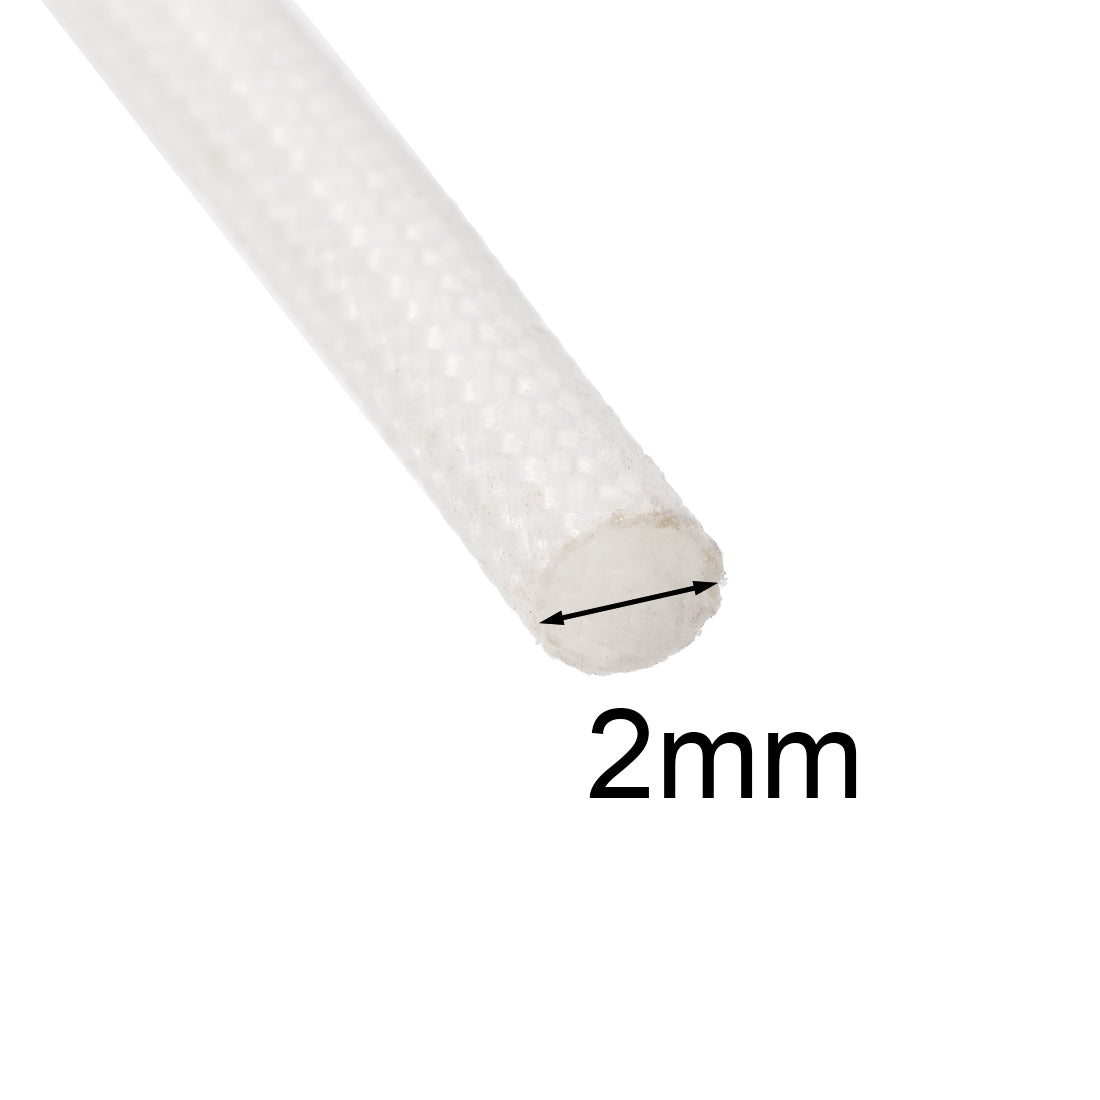 uxcell Uxcell Insulation Cable Protector, 33Ft-2mm High TEMP Silicone Fiberglass Sleeve White